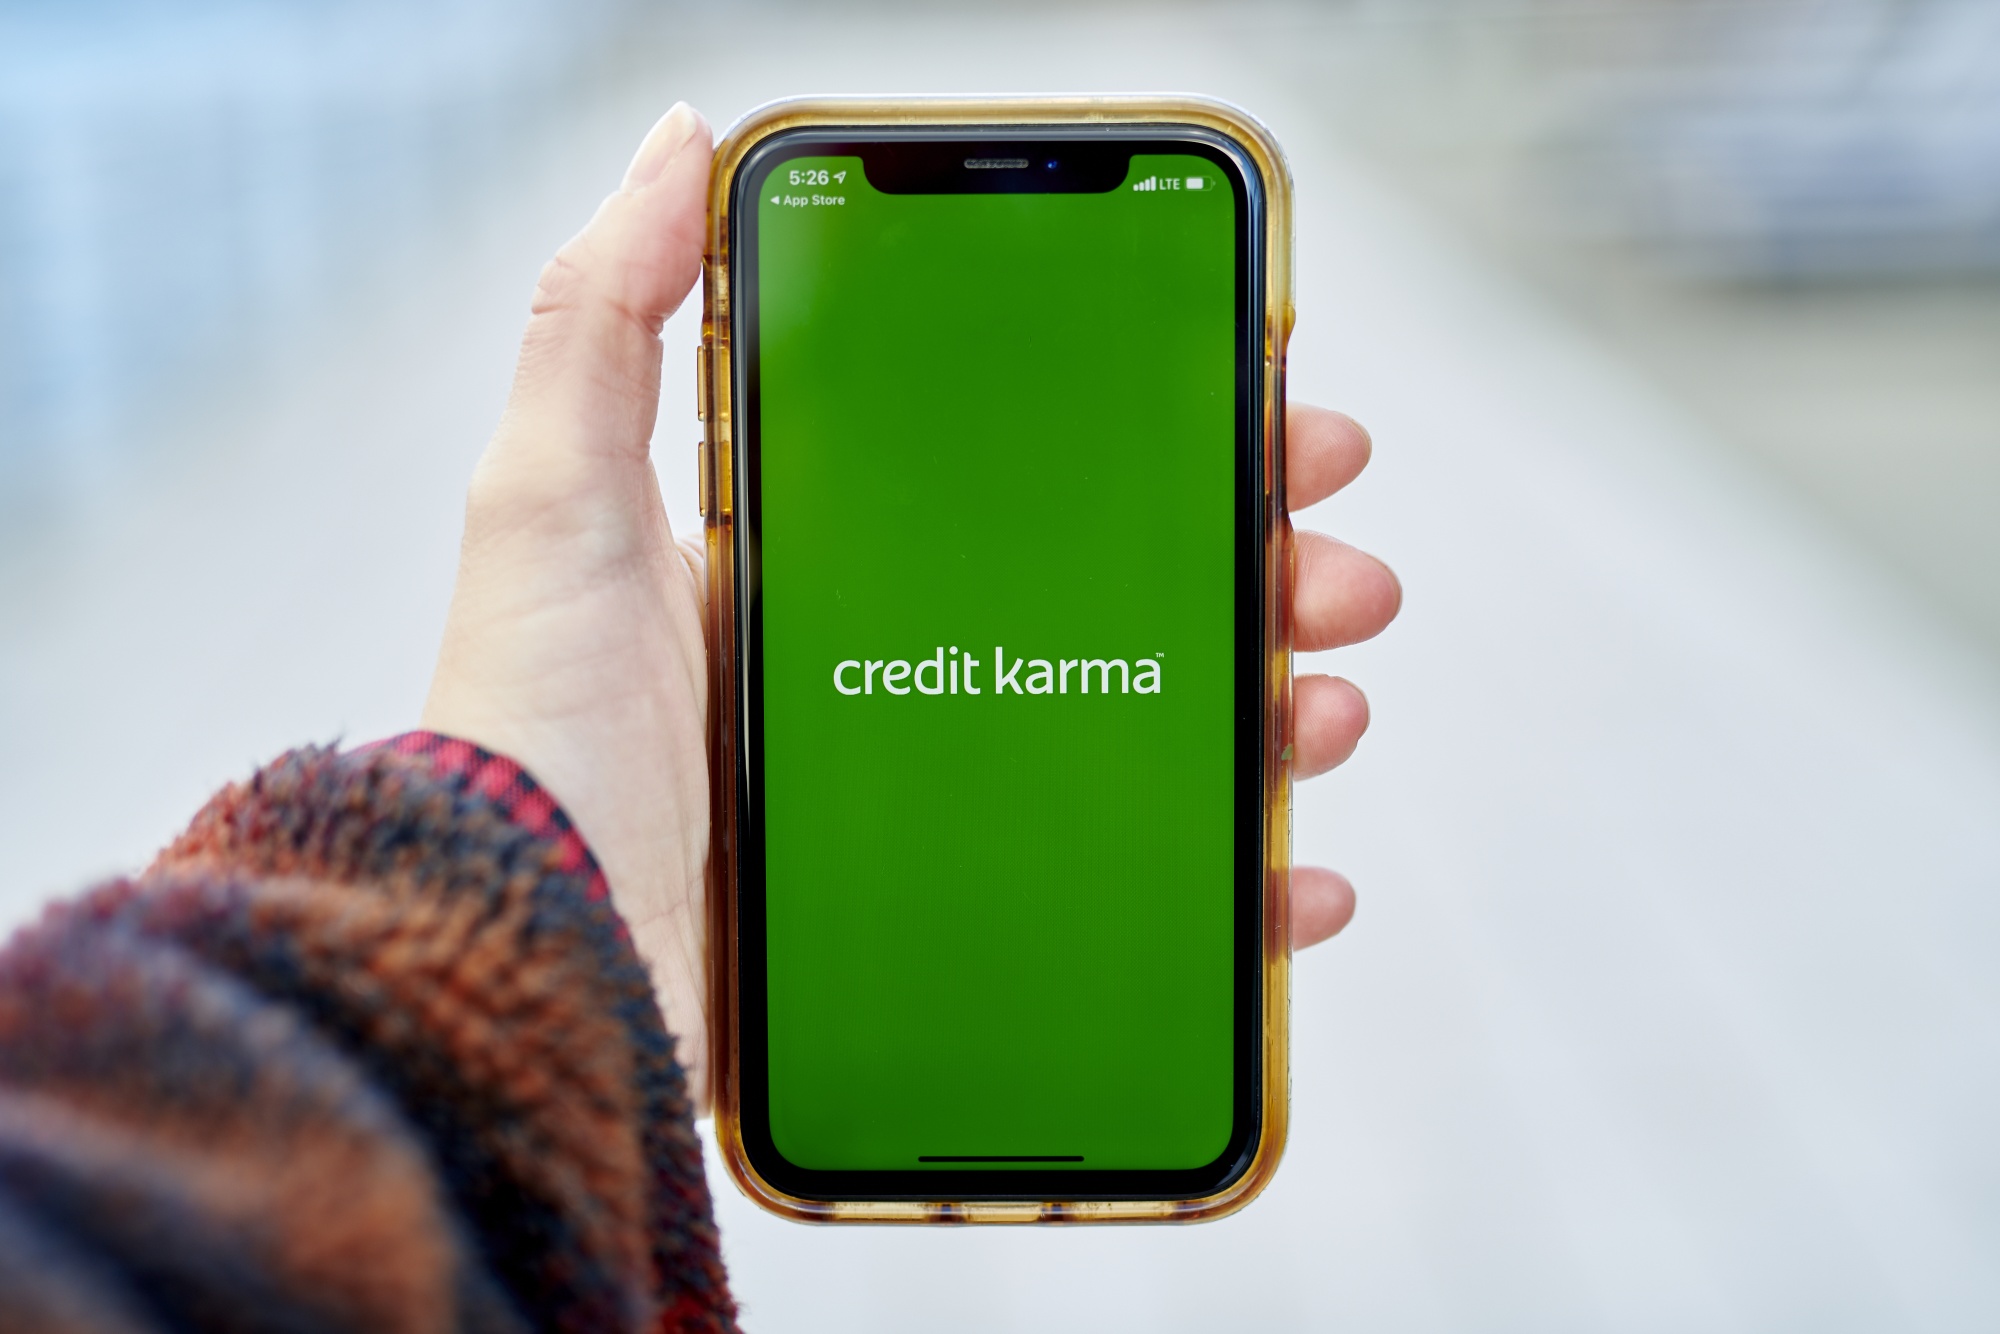 Popular features to track personal spending and income are offered on Credit Karma, where users are invited “to continue their financial journey,” Intuit said.